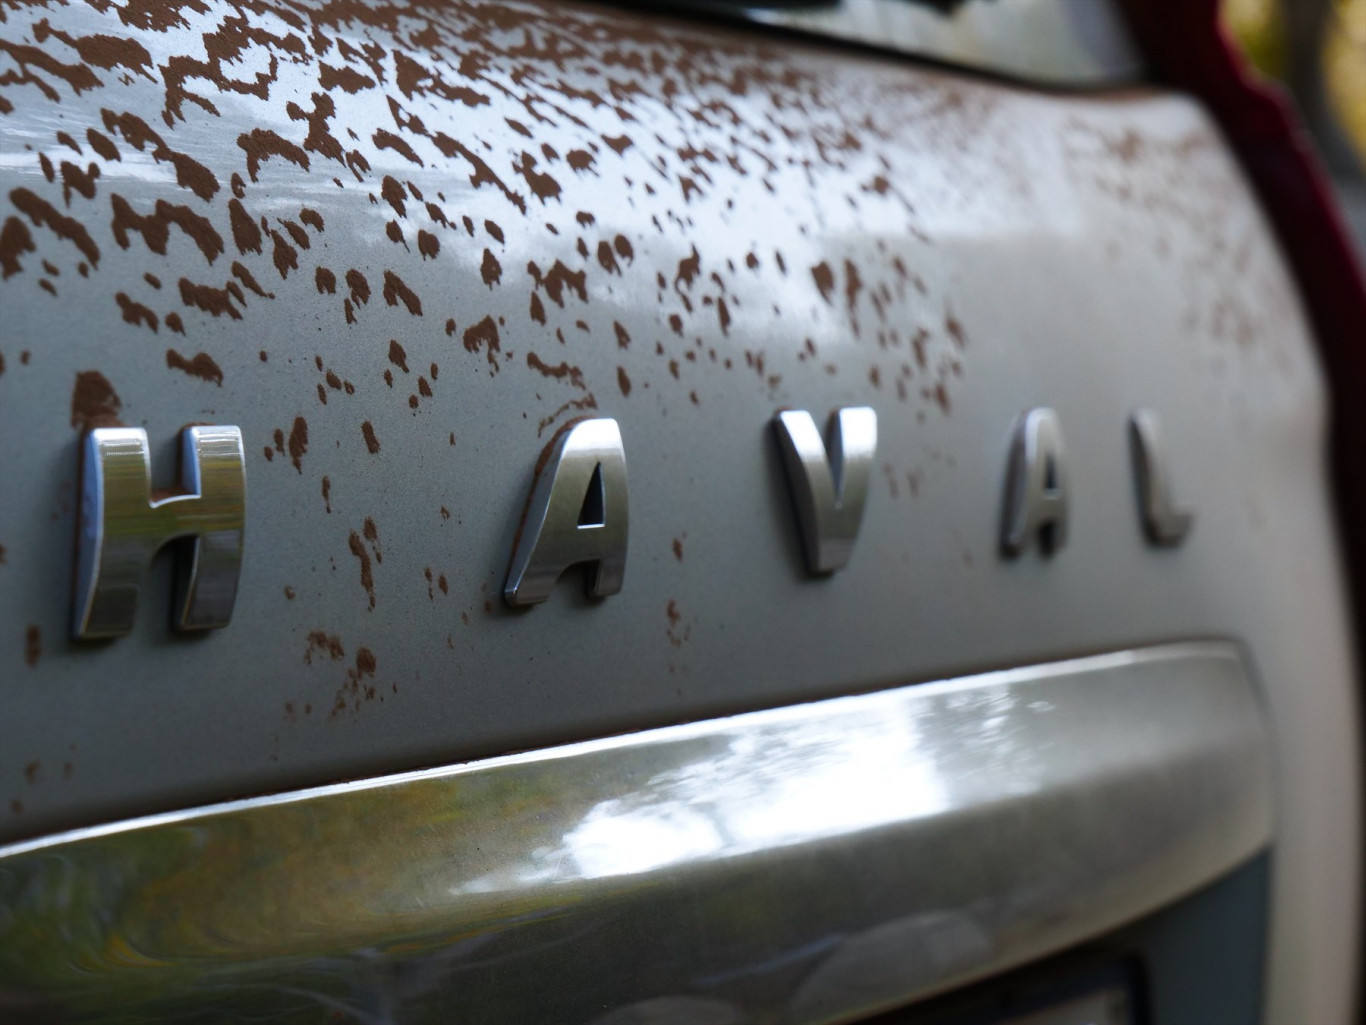 Haval South Africa celebrates their second birthday with their customers at the first annual Haval GWM/Harvest day